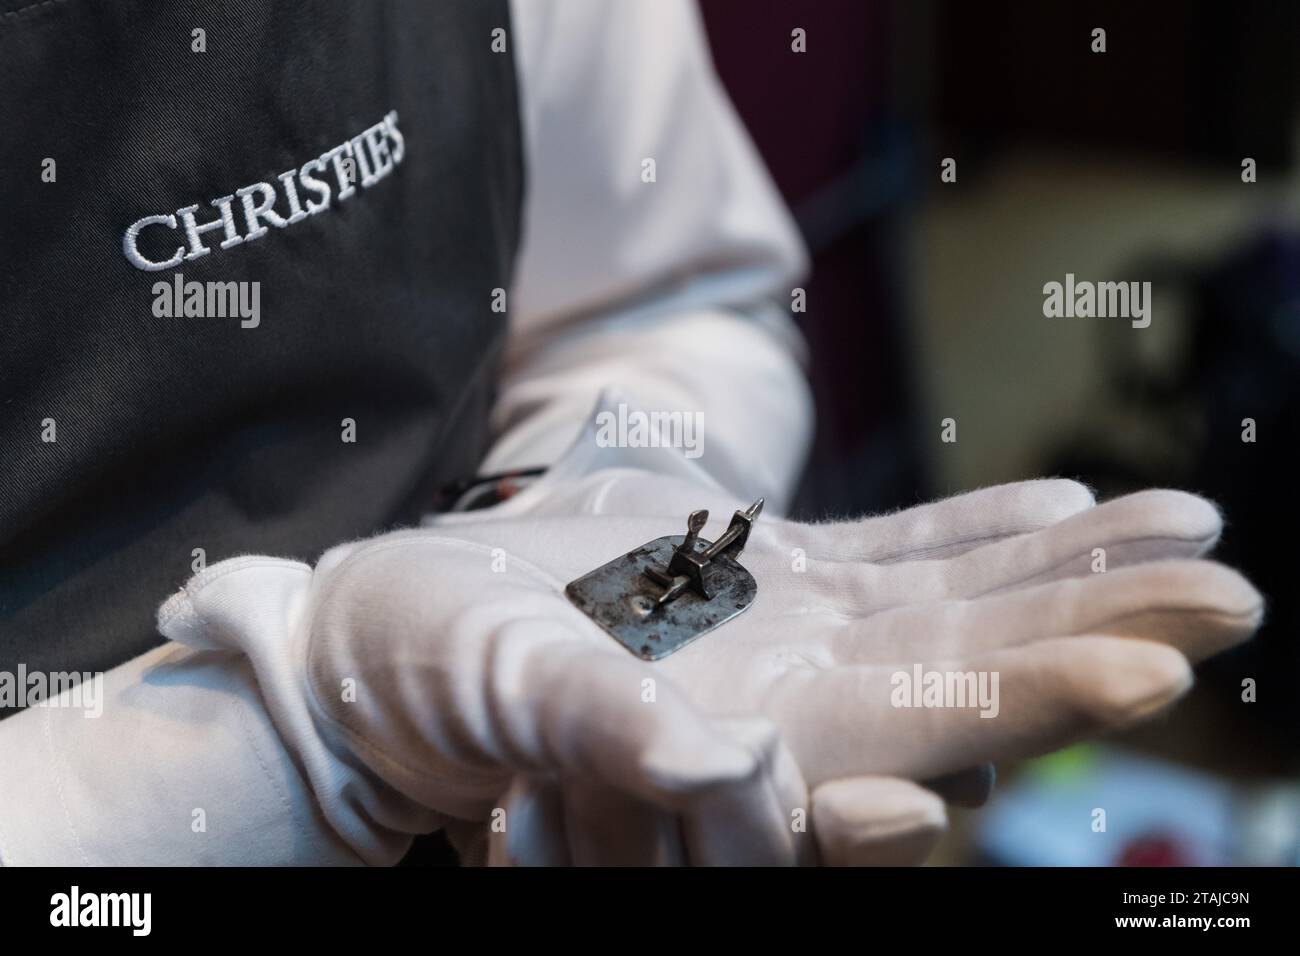 LONDON, UNITED KINGDOM - DECEMBER 01, 2023: A technician holds a silver microscope, one of the rarest microscopes by the father of microbiology, Antoni van Leeuwenhoek (1632-1723) and with the highest magnification extant (estimate: £150,000-250,000) during a photocall at Christie's auction house showcasing the highlights from the Classic Week Sales in London, United Kingdom on December 01, 2023. Spanning art from antiquity to the 21st century, with six live auctions and one online sale, the Classic Week Sales series will run from 1 to 15 December. (Photo by WIktor Szymanowicz/NurPhoto) Stock Photo